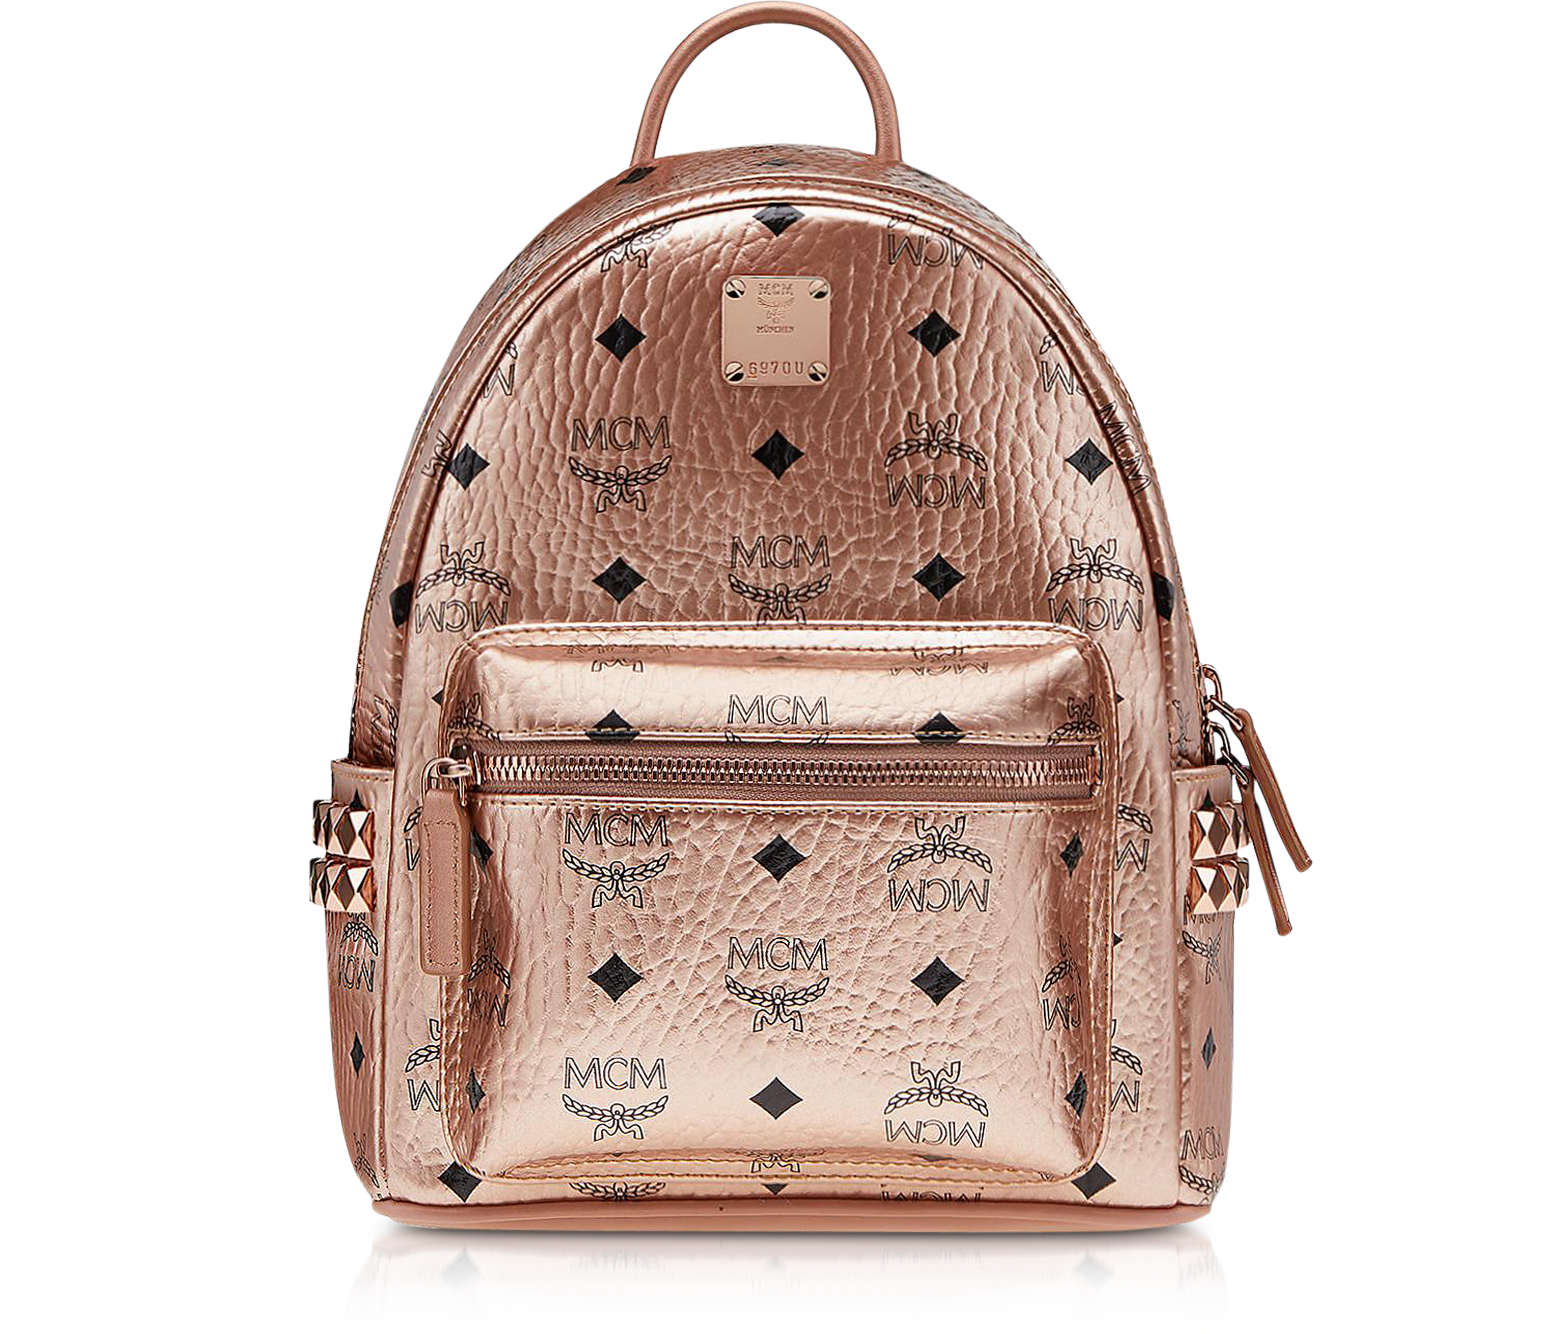 backpack with gold